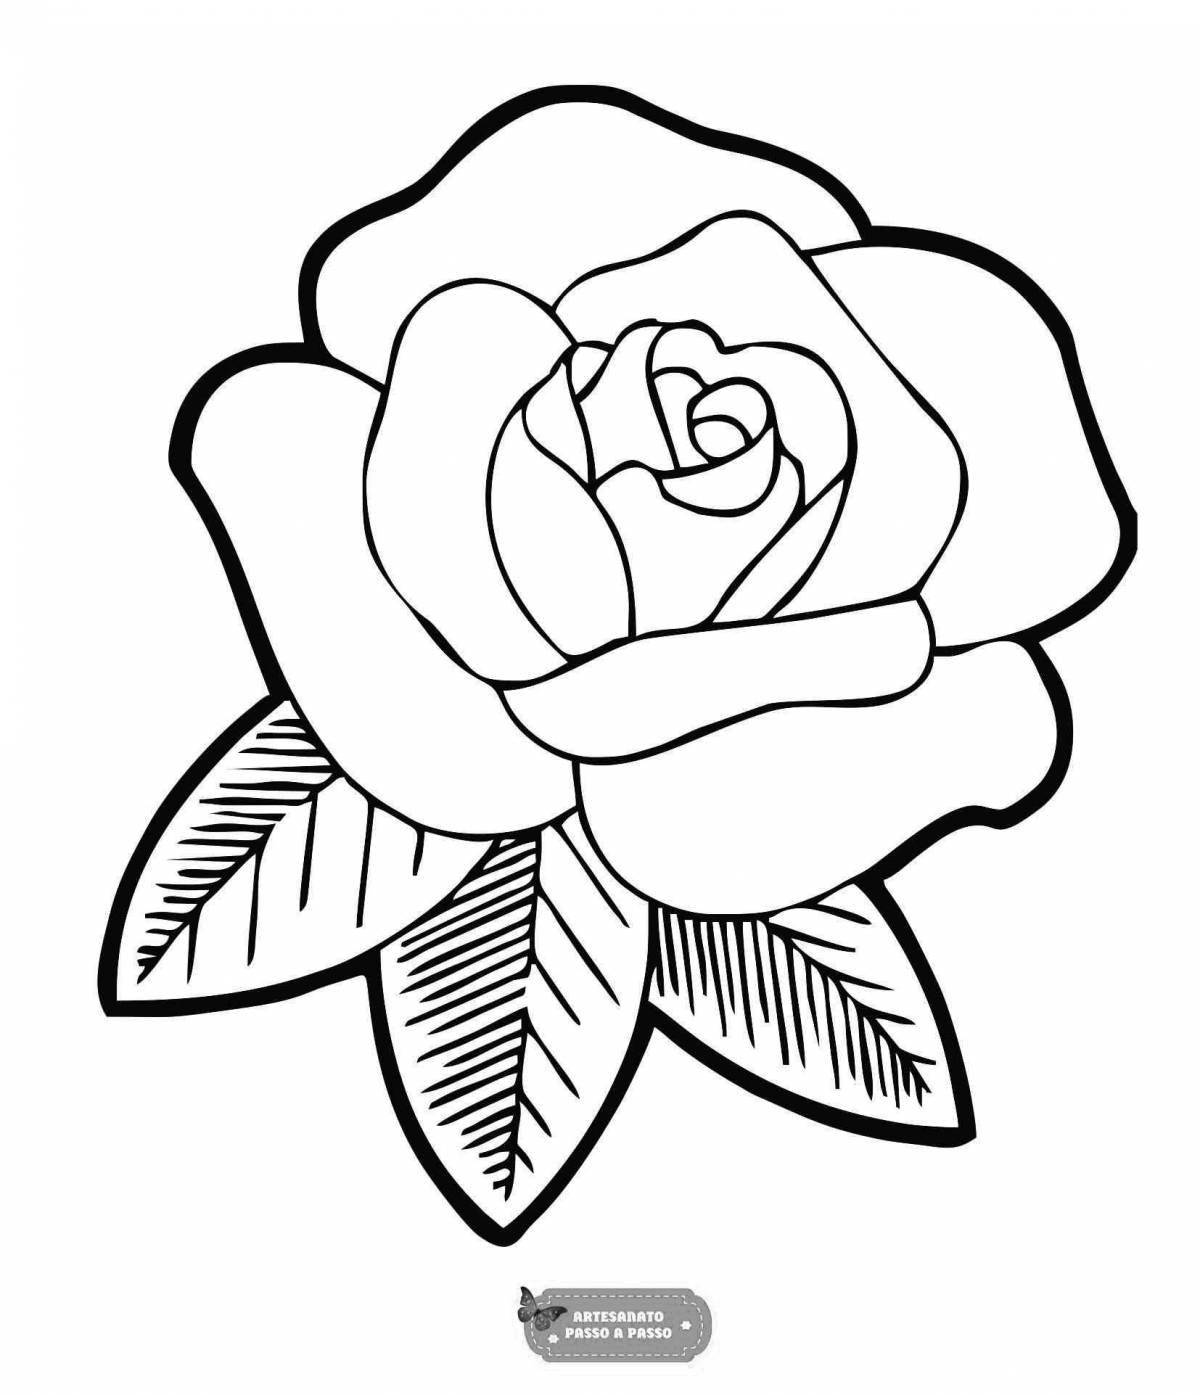 Colorful rosette coloring book